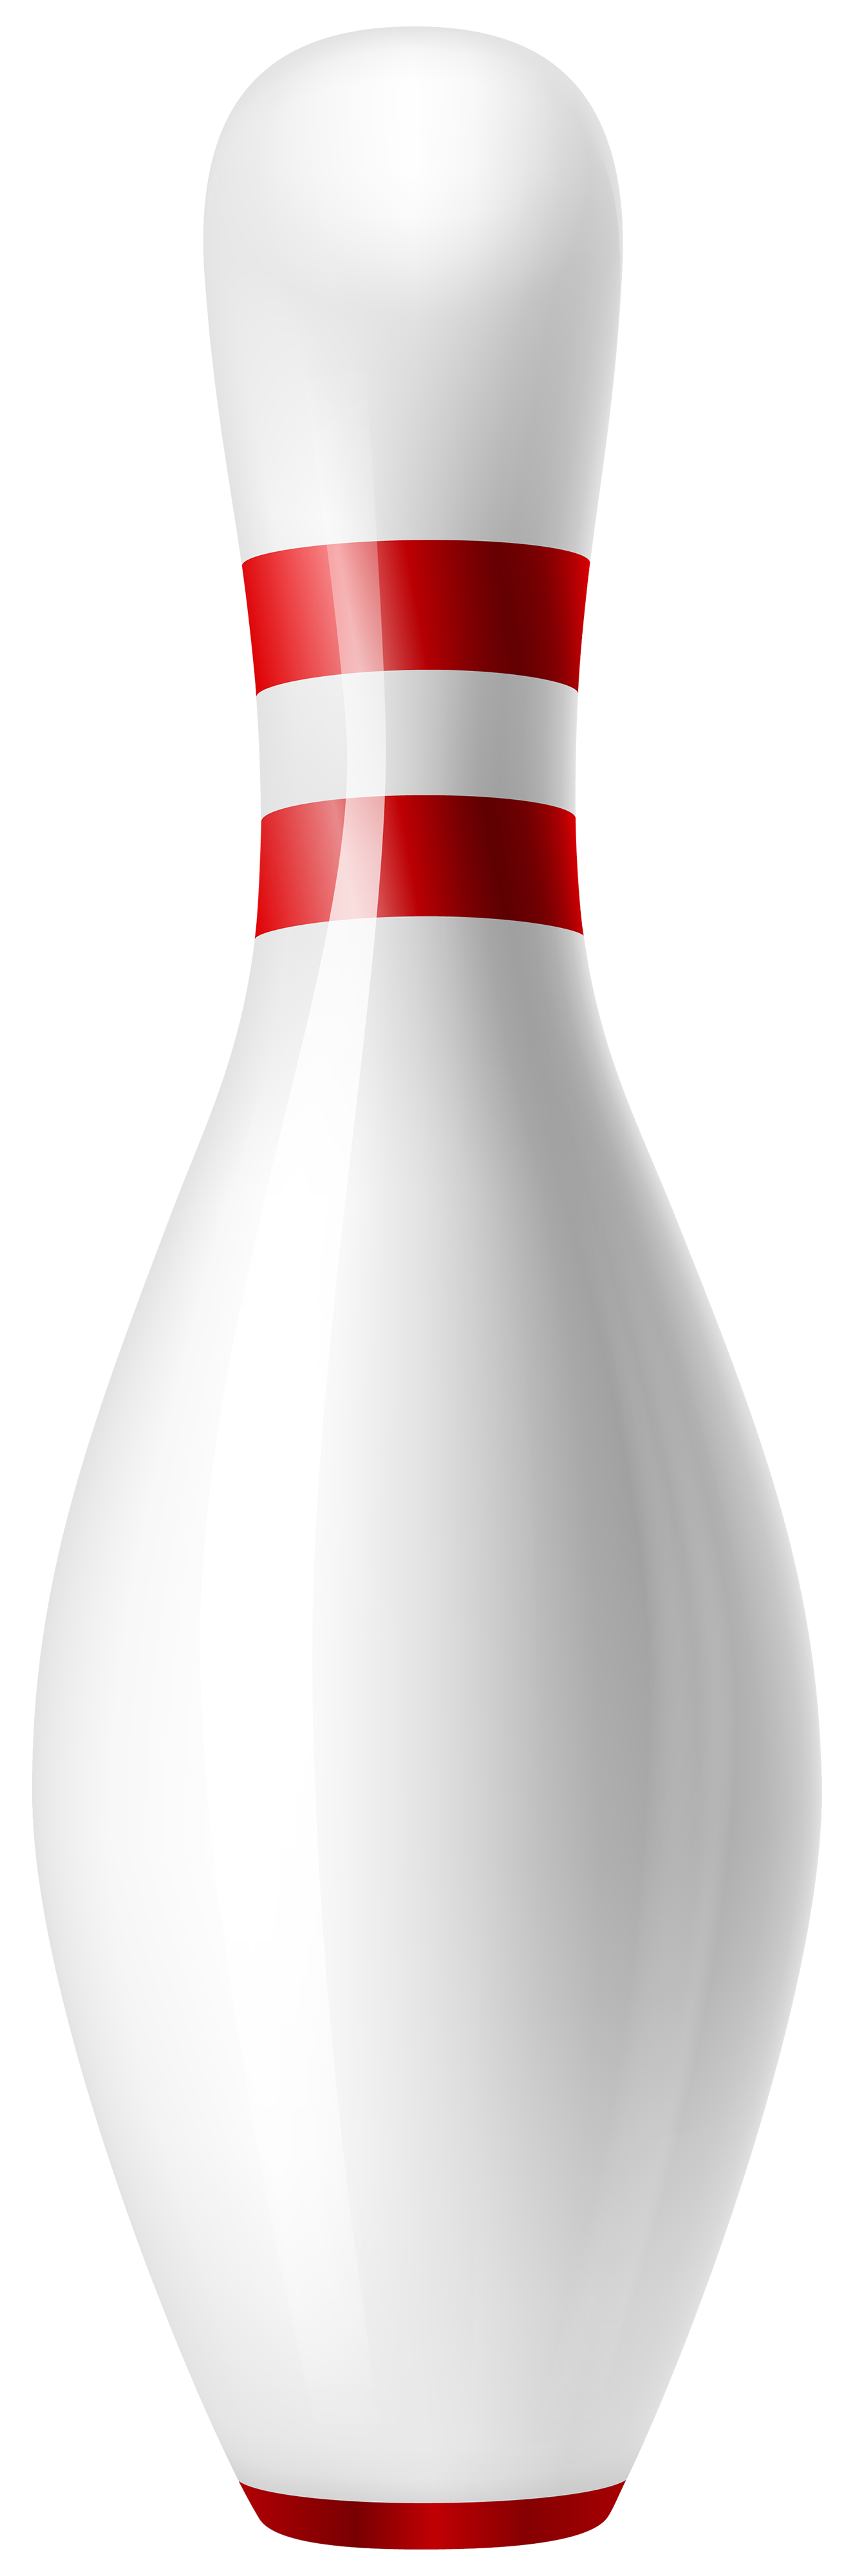 Bowling Pin PNG Clipart - Best WEB Clipart